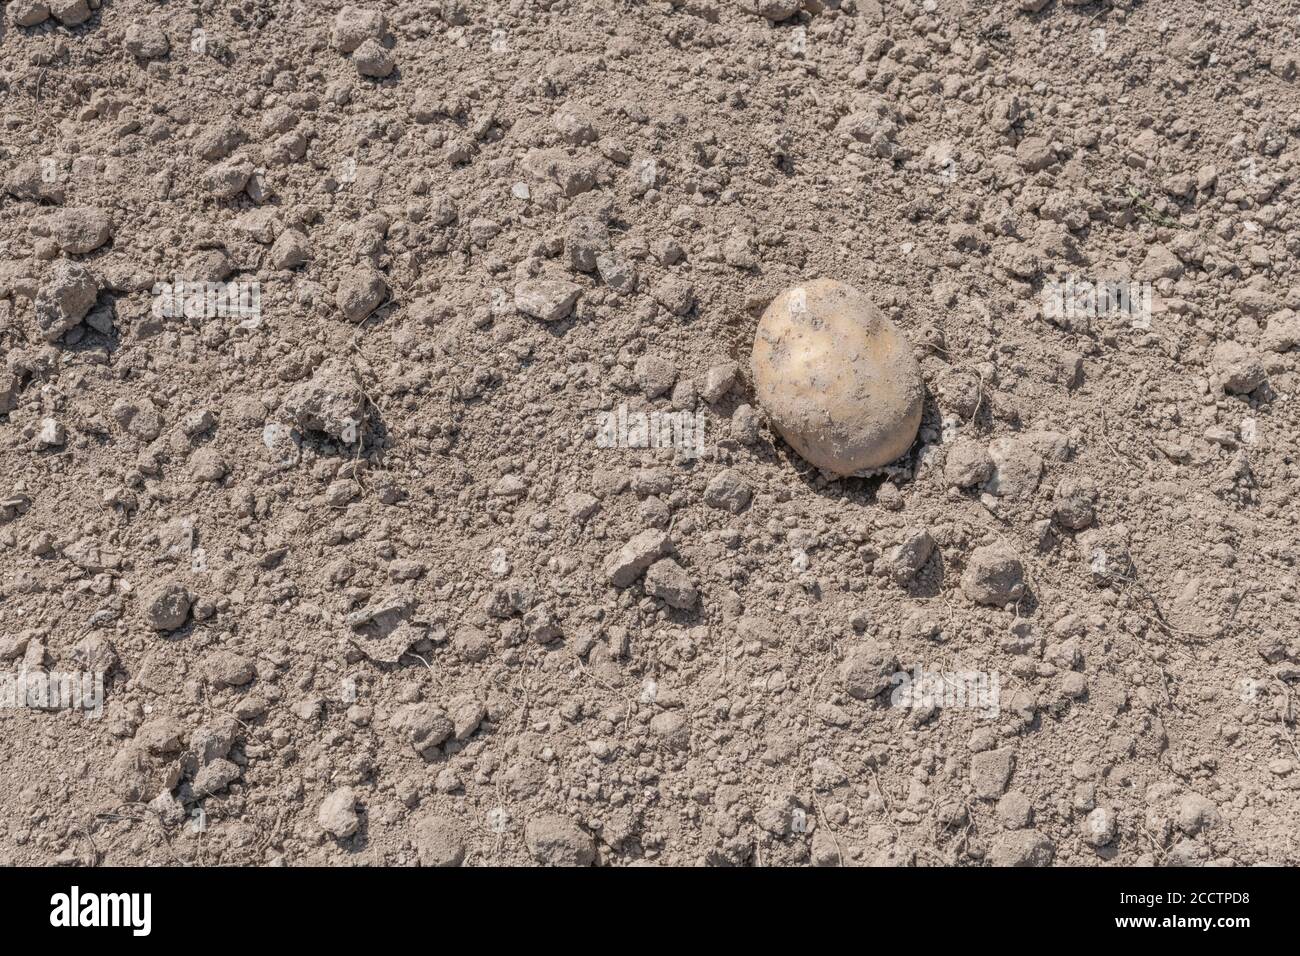 Single solitary isolated potato lying on crumbly soil during potato harvesting. Abstract potato farming, metaphor UK food production, UK agriculture. Stock Photo